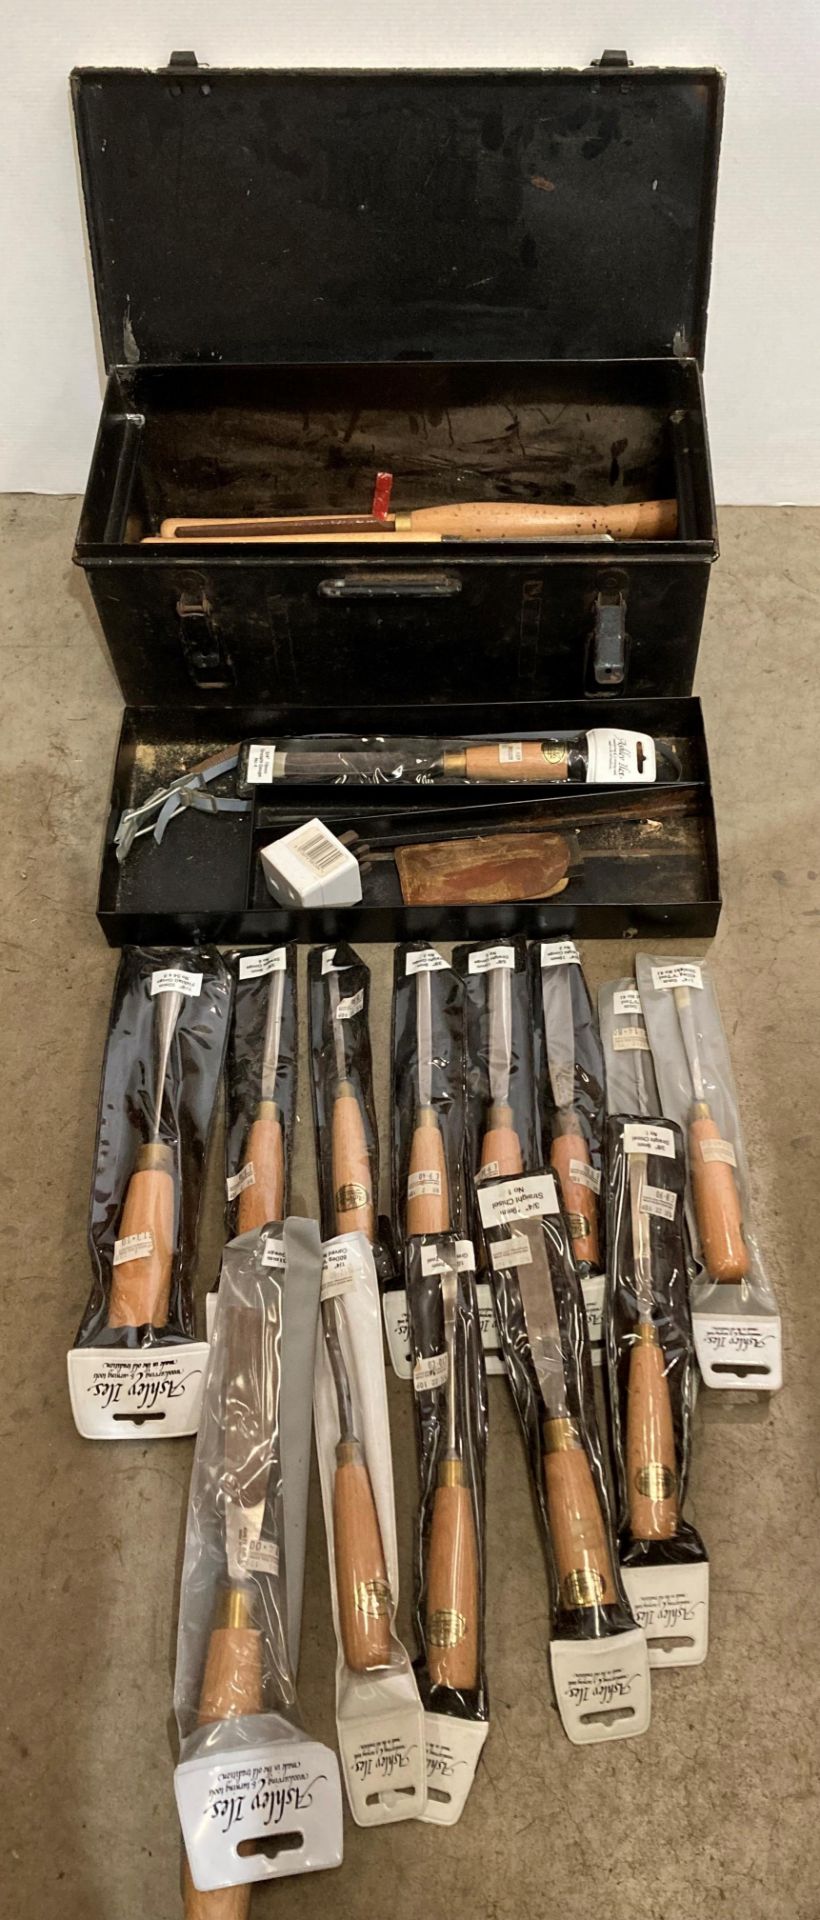 White and black metal tool box with 14 new wood turning chisels by Ashley Iles and 10 other wood